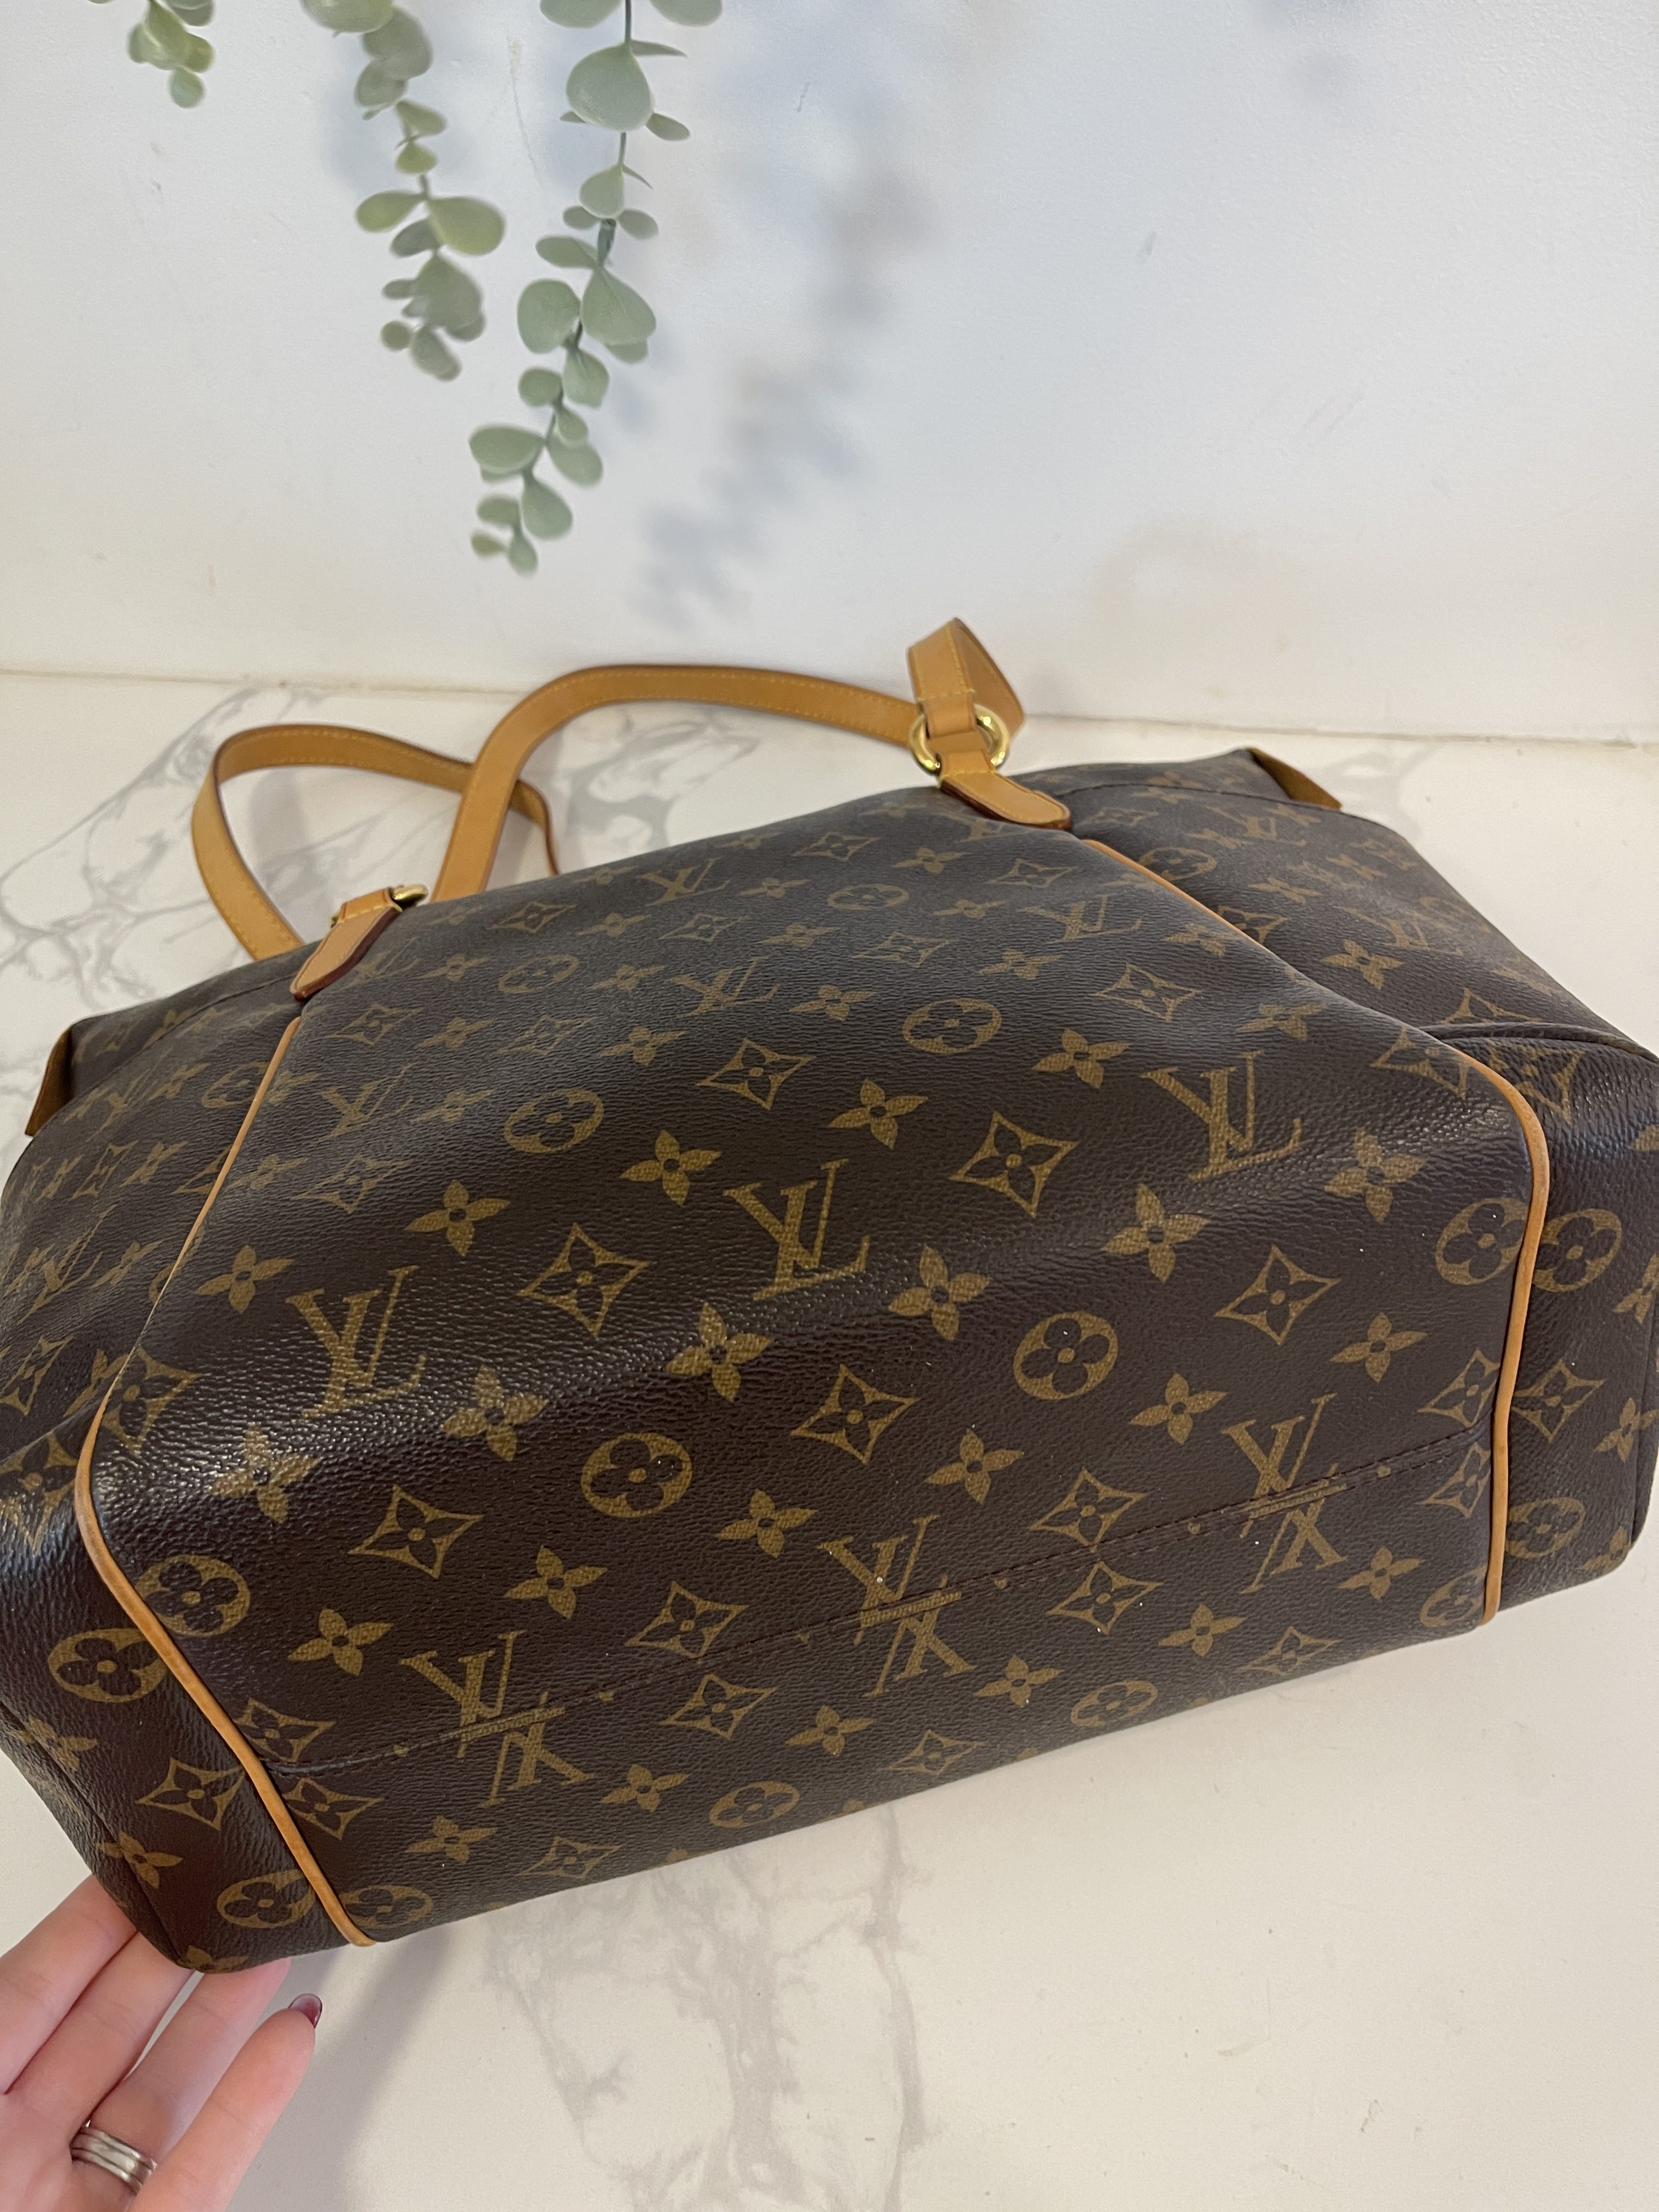 To return or not to return .. so i purchased the LV Totally MM